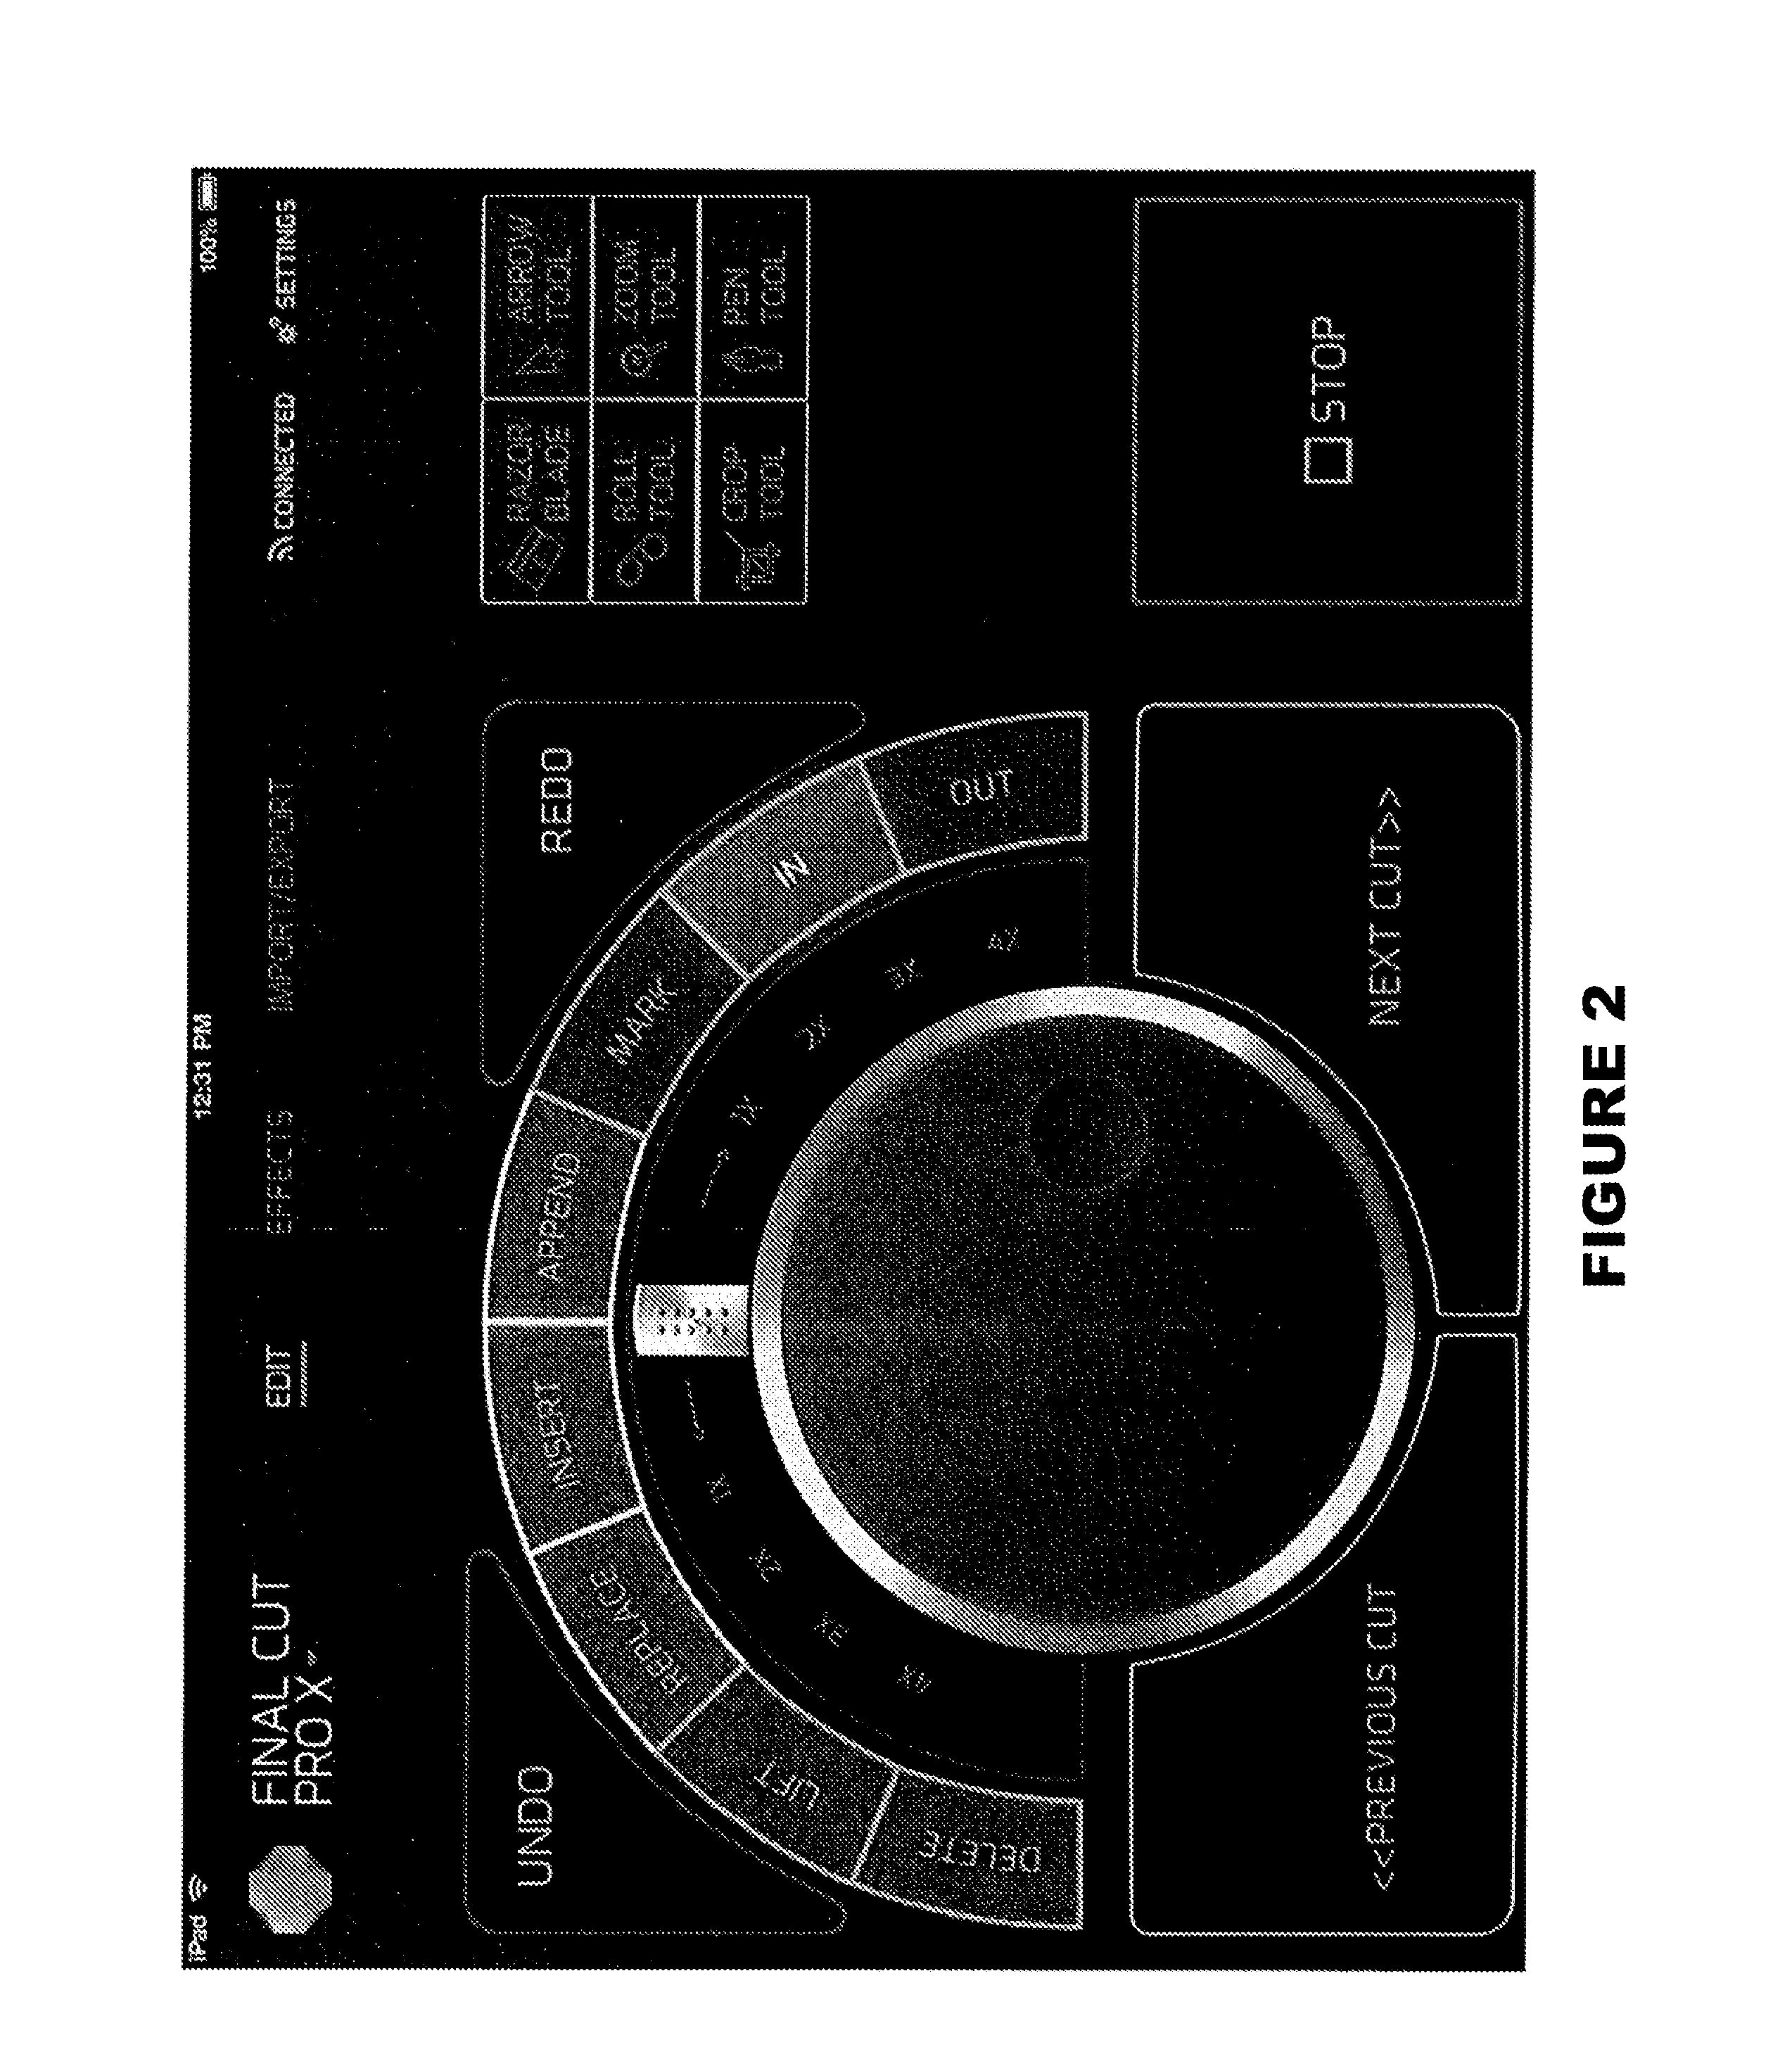 Configured input display for communicating to computational apparatus